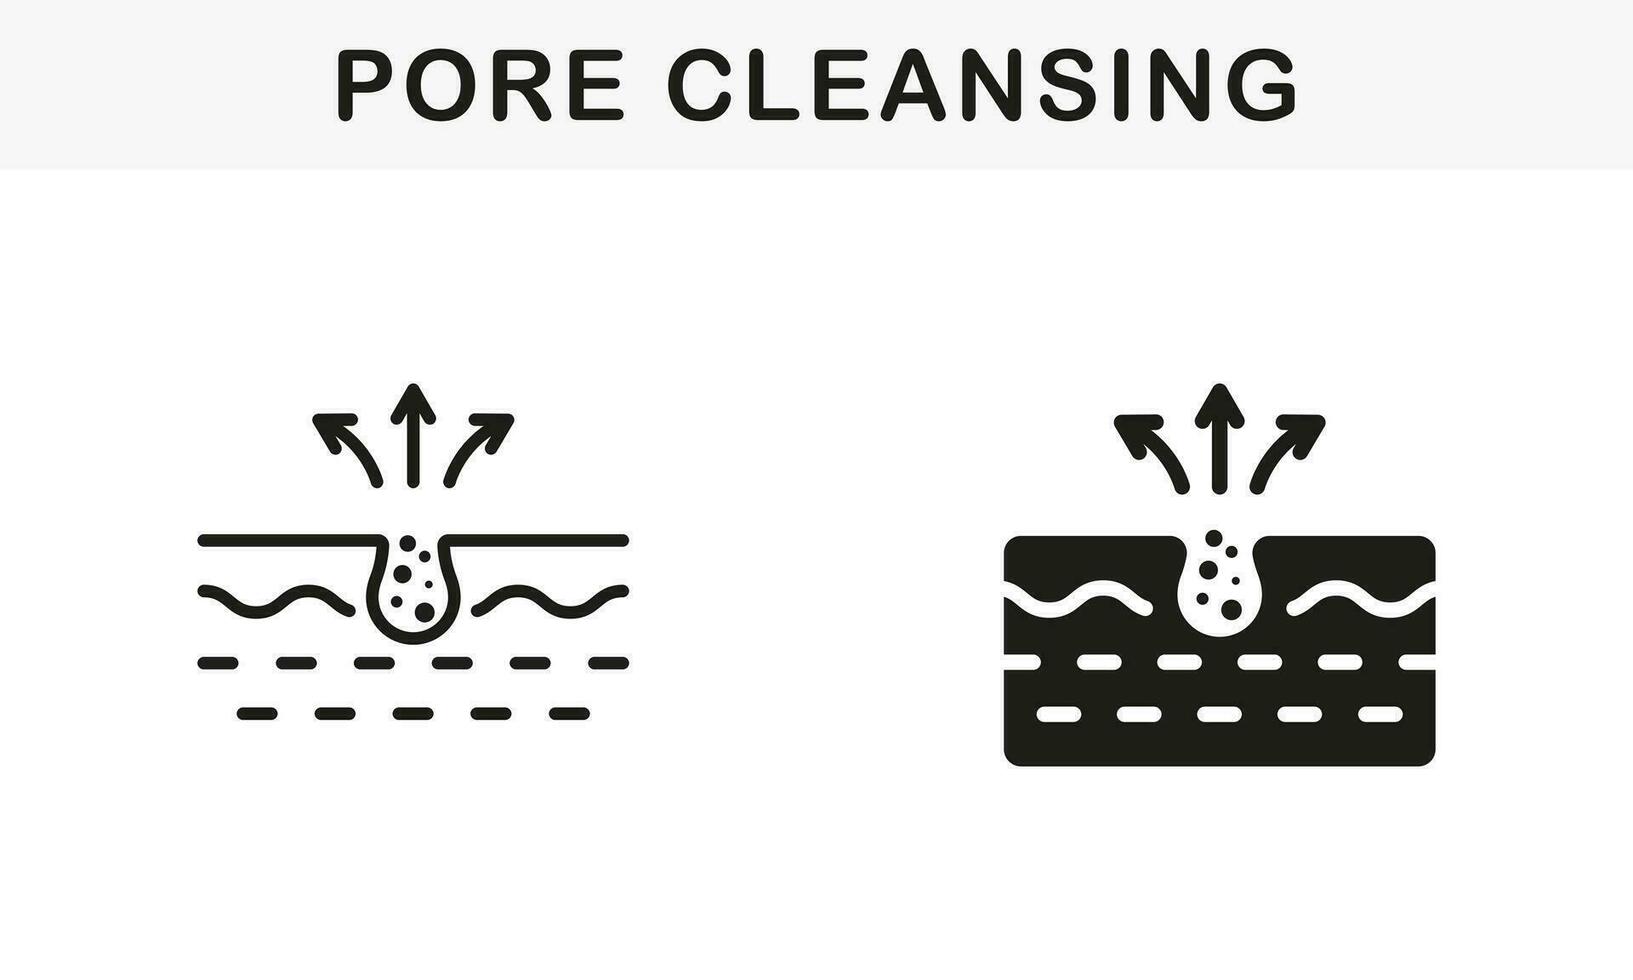 Cleansing Clogged Deep Pore Line and Silhouette Black Icon Set. Unclog Skin Face of Dirty Blackhead and Dust Symbol Collection. Facial Skin Care Pictogram. Isolated Vector Illustration.